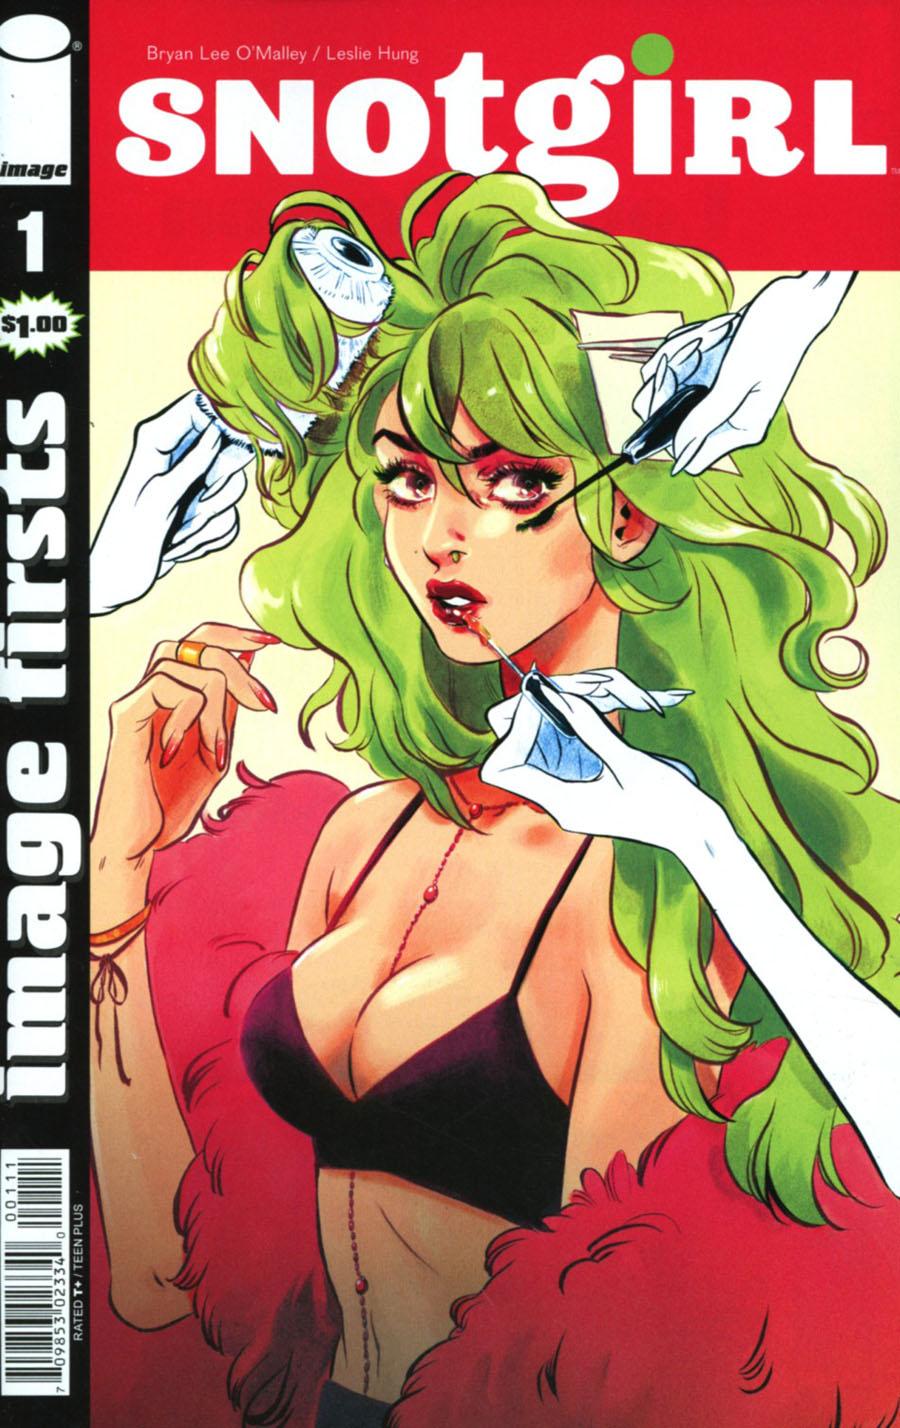 Image Firsts Snotgirl Vol. 1 #1